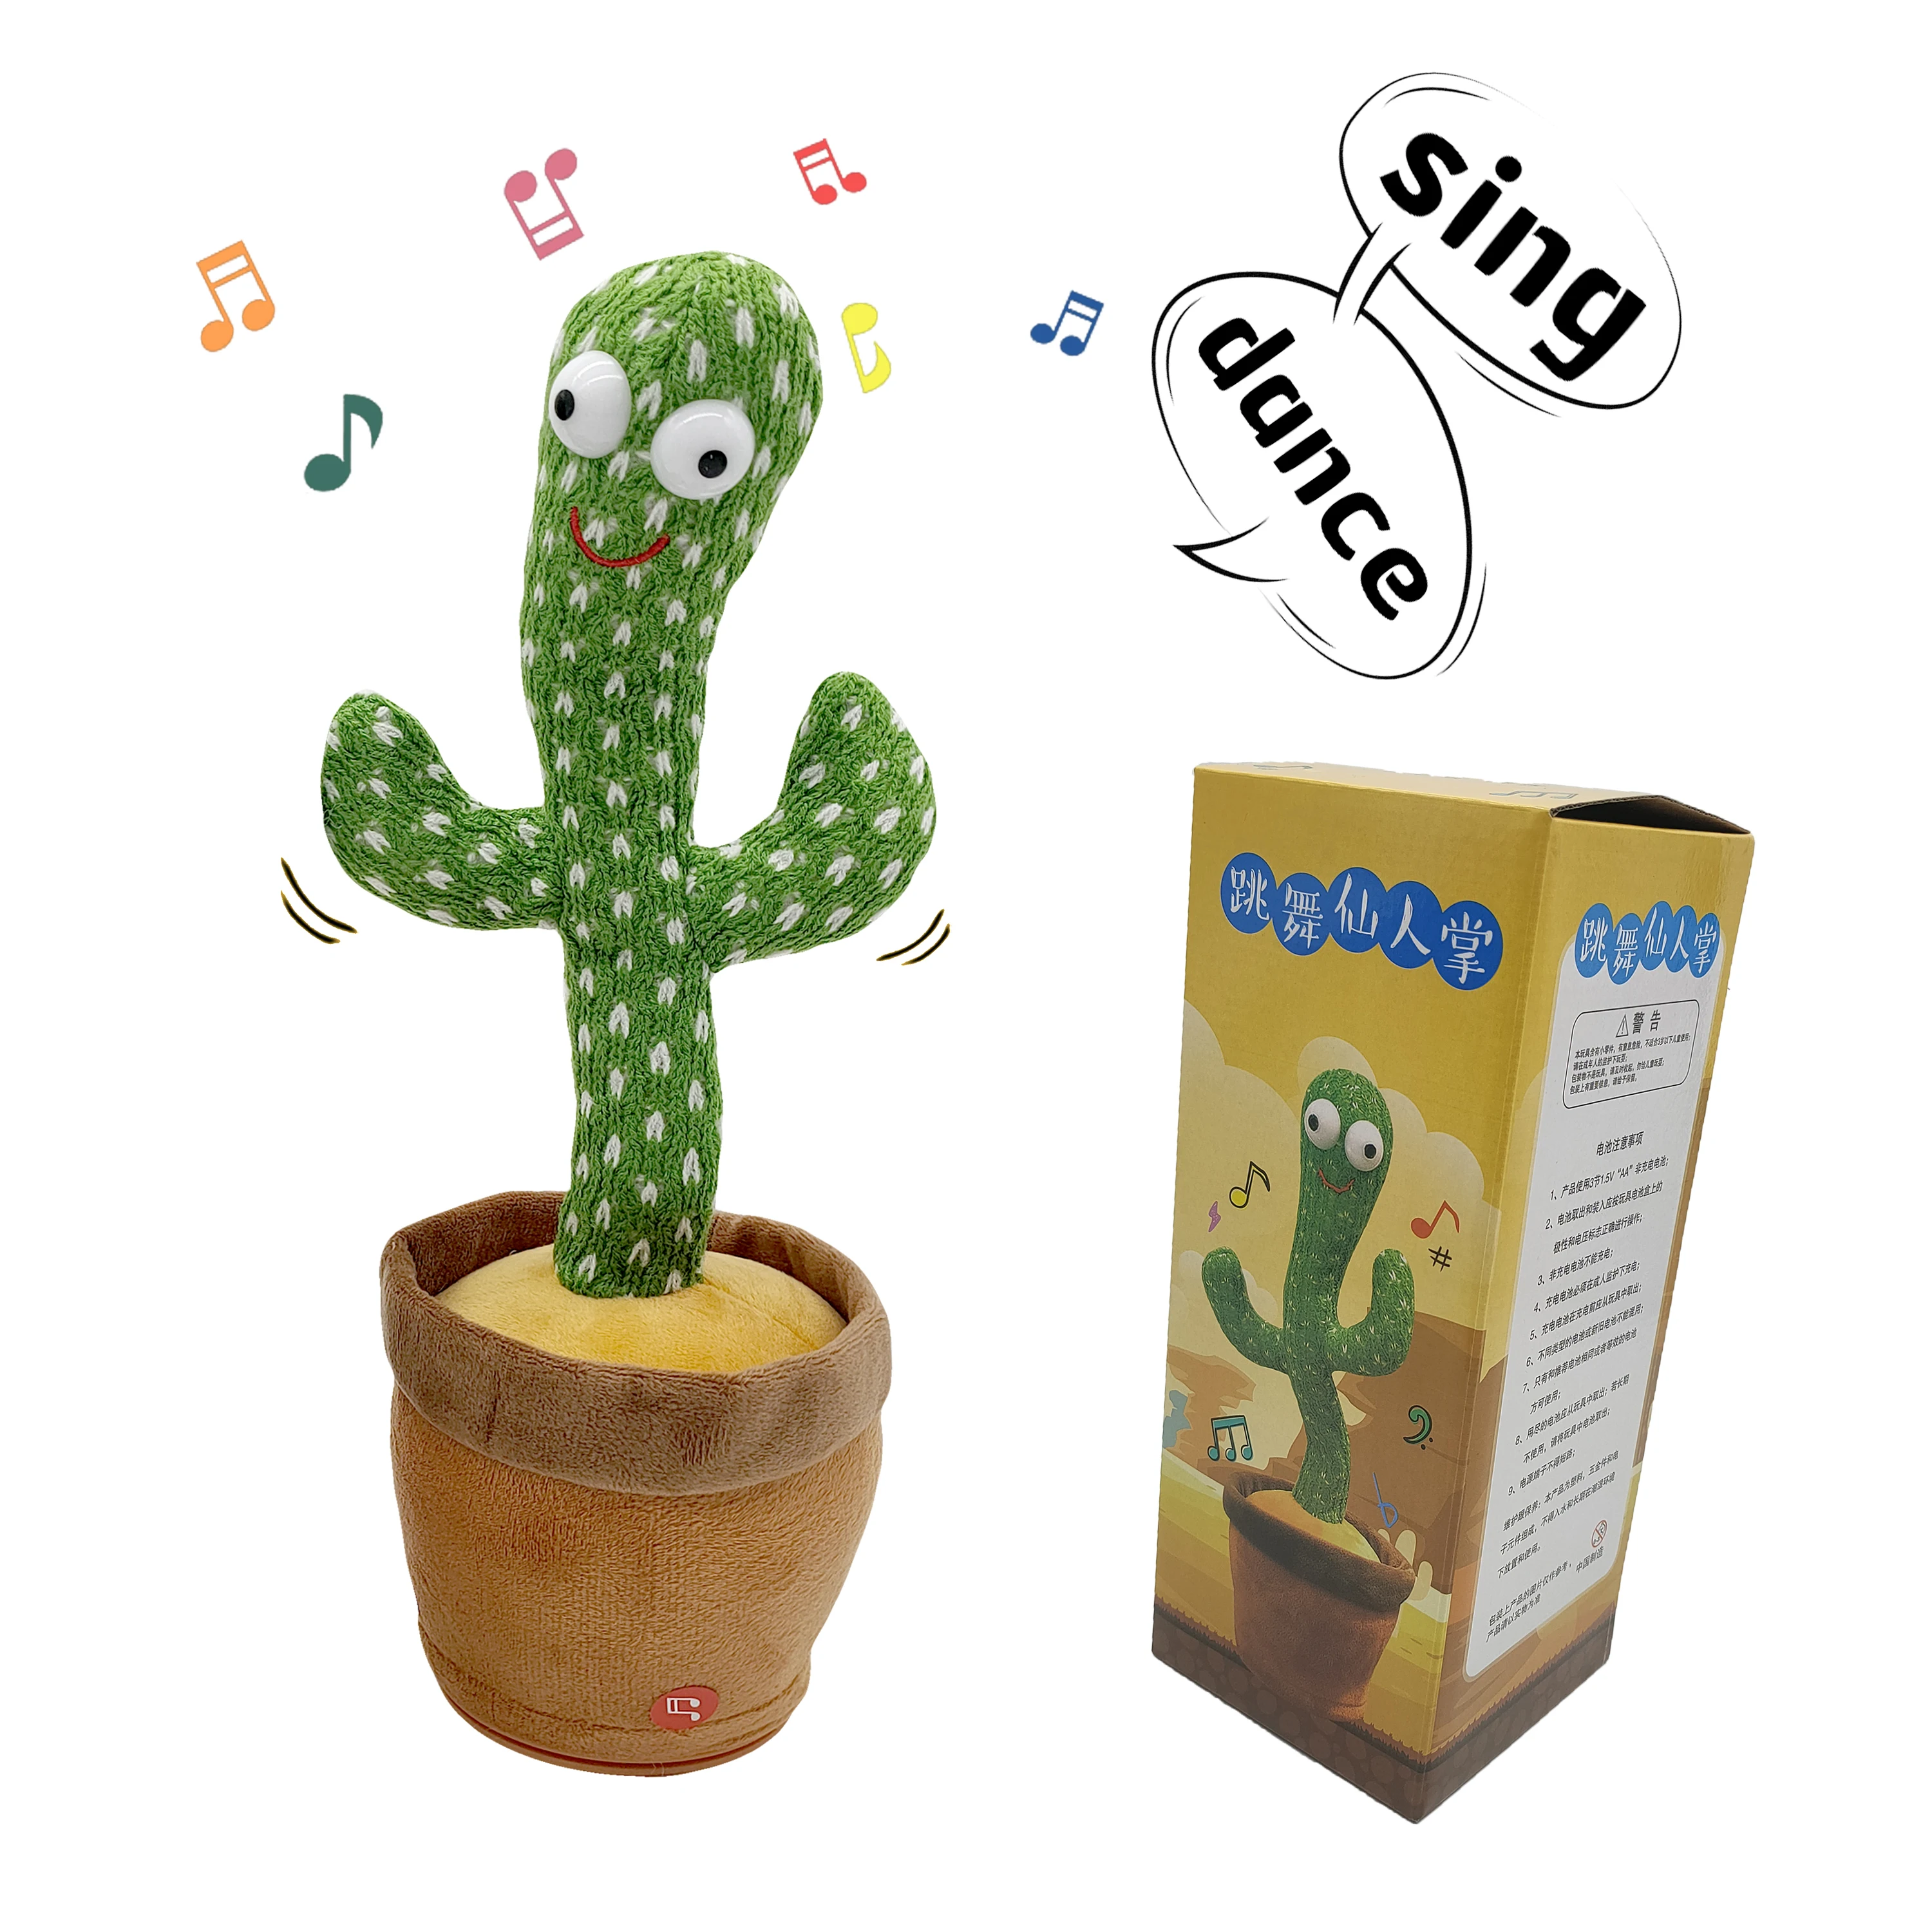 

New Hot Selling Dancing Talking Fancy Cactus Toys Bailarin Stuffed Plush Toy With LED Light Singing Wiggly Cactus Dancer